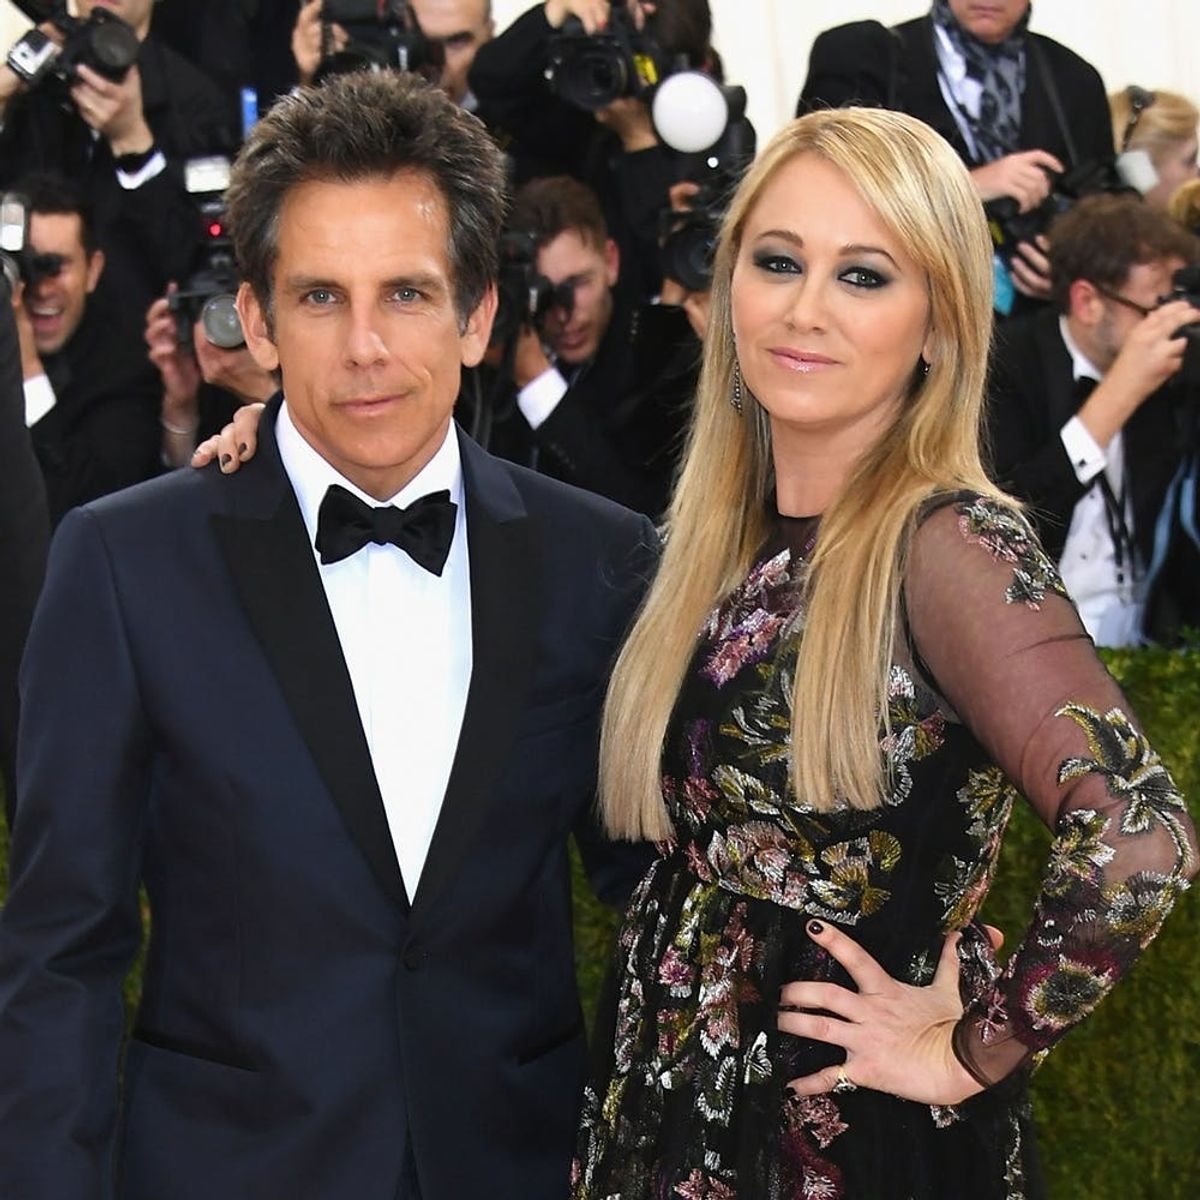 Say It Ain’t So! Ben Stiller and Christine Taylor Are Calling It Quits After 17 Years of Marriage